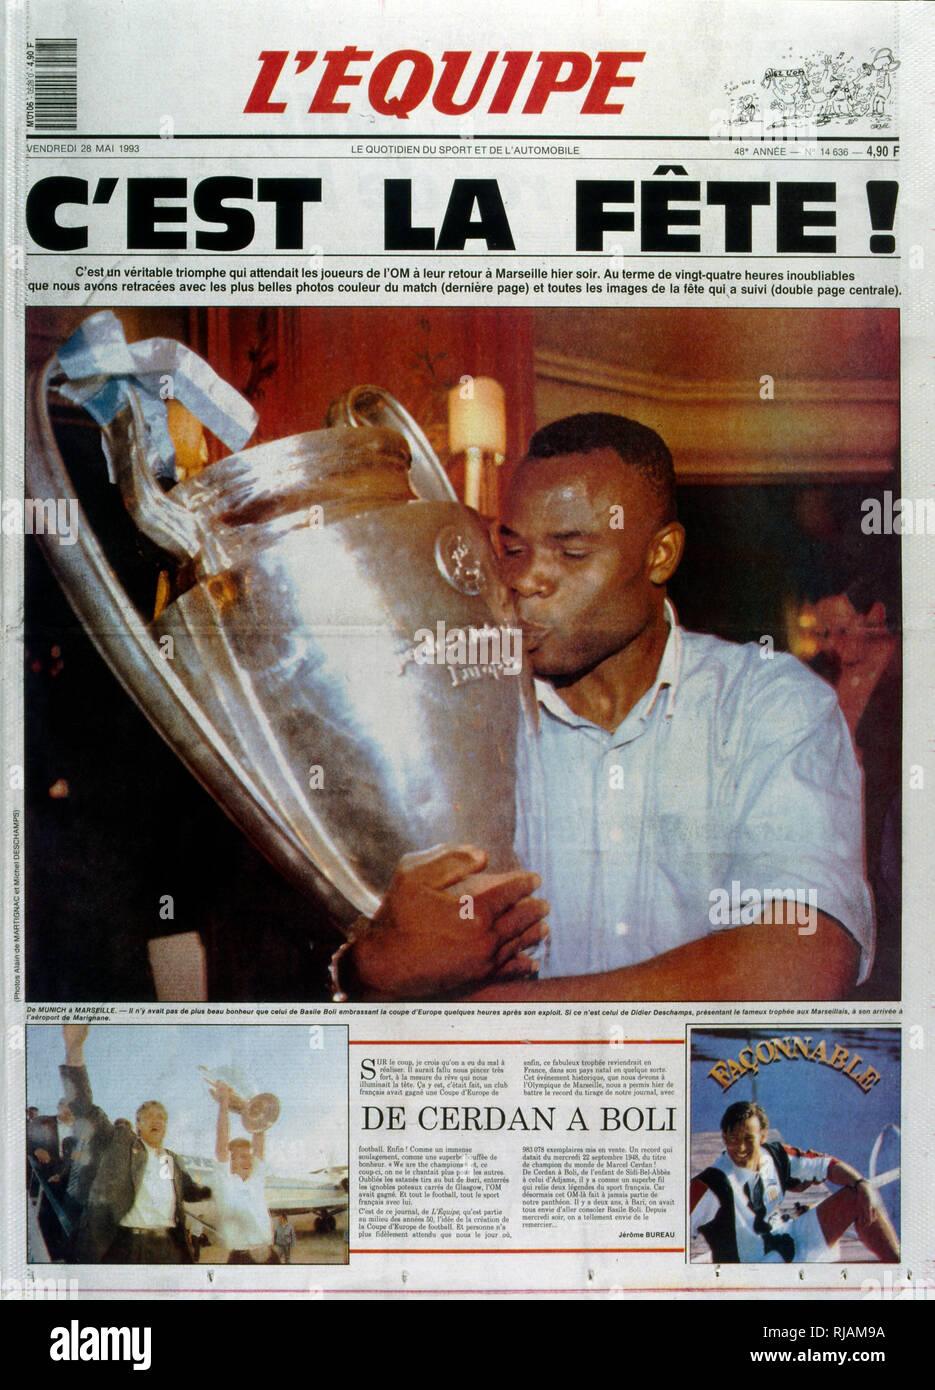 French publication 'L'Equipe' reporting the Marseilles Football club winning the UEFA Champions League in 1993. The highlight of the Marseilles football club's history was winning the new format UEFA Champions League in 1993. Basile Boli scored the only goal against Italy's Milan in the final held in Munich's Olympic Stadium. This triumph, however, was followed by a decade of decline. In 1994, due to financial irregularities and a match fixing scandal involving then president Bernard Tapie Stock Photo